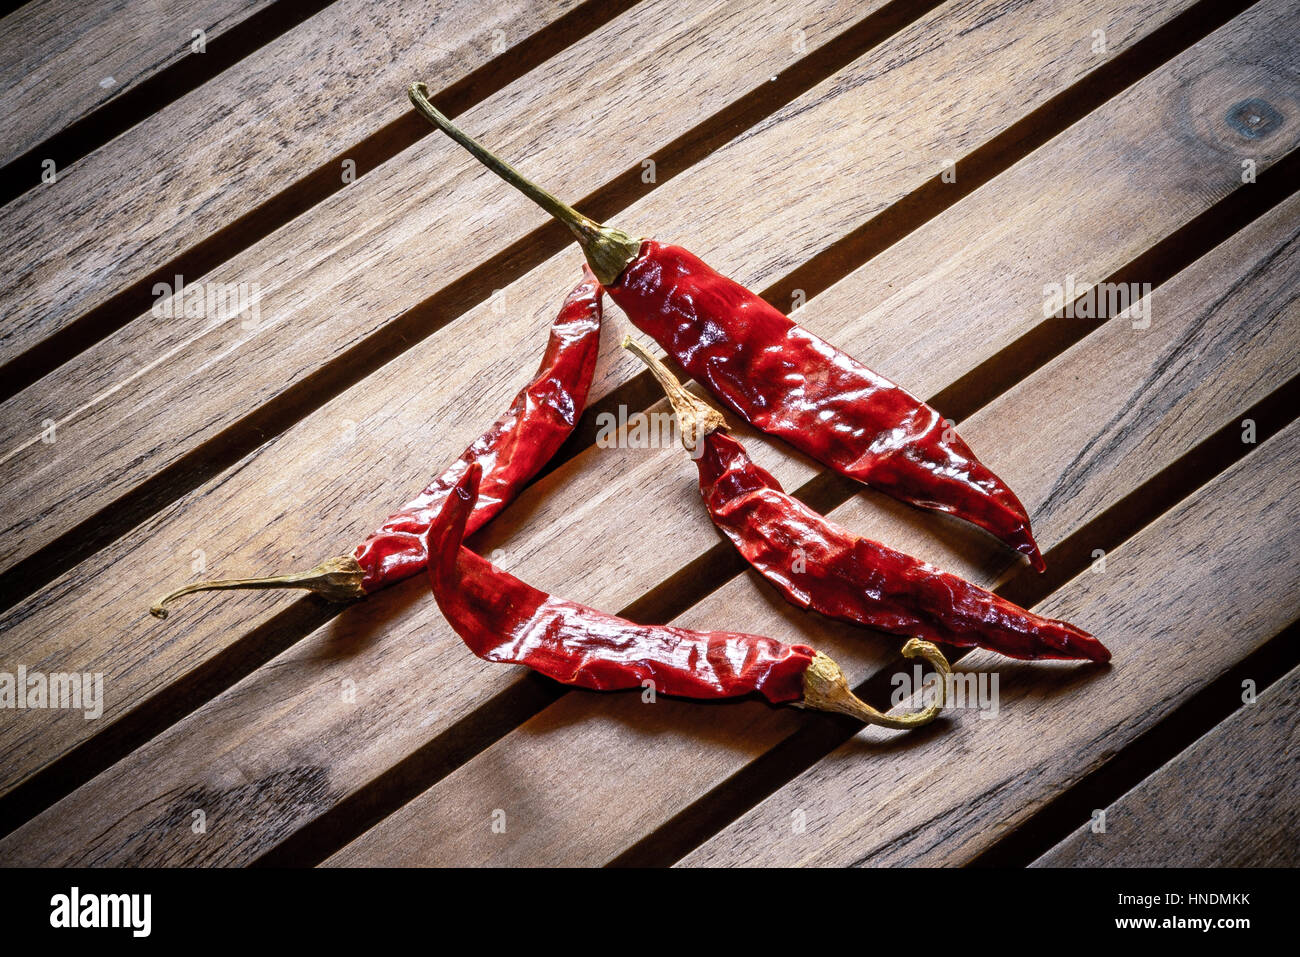 Red Hot Chilly Peppers Stock Photo